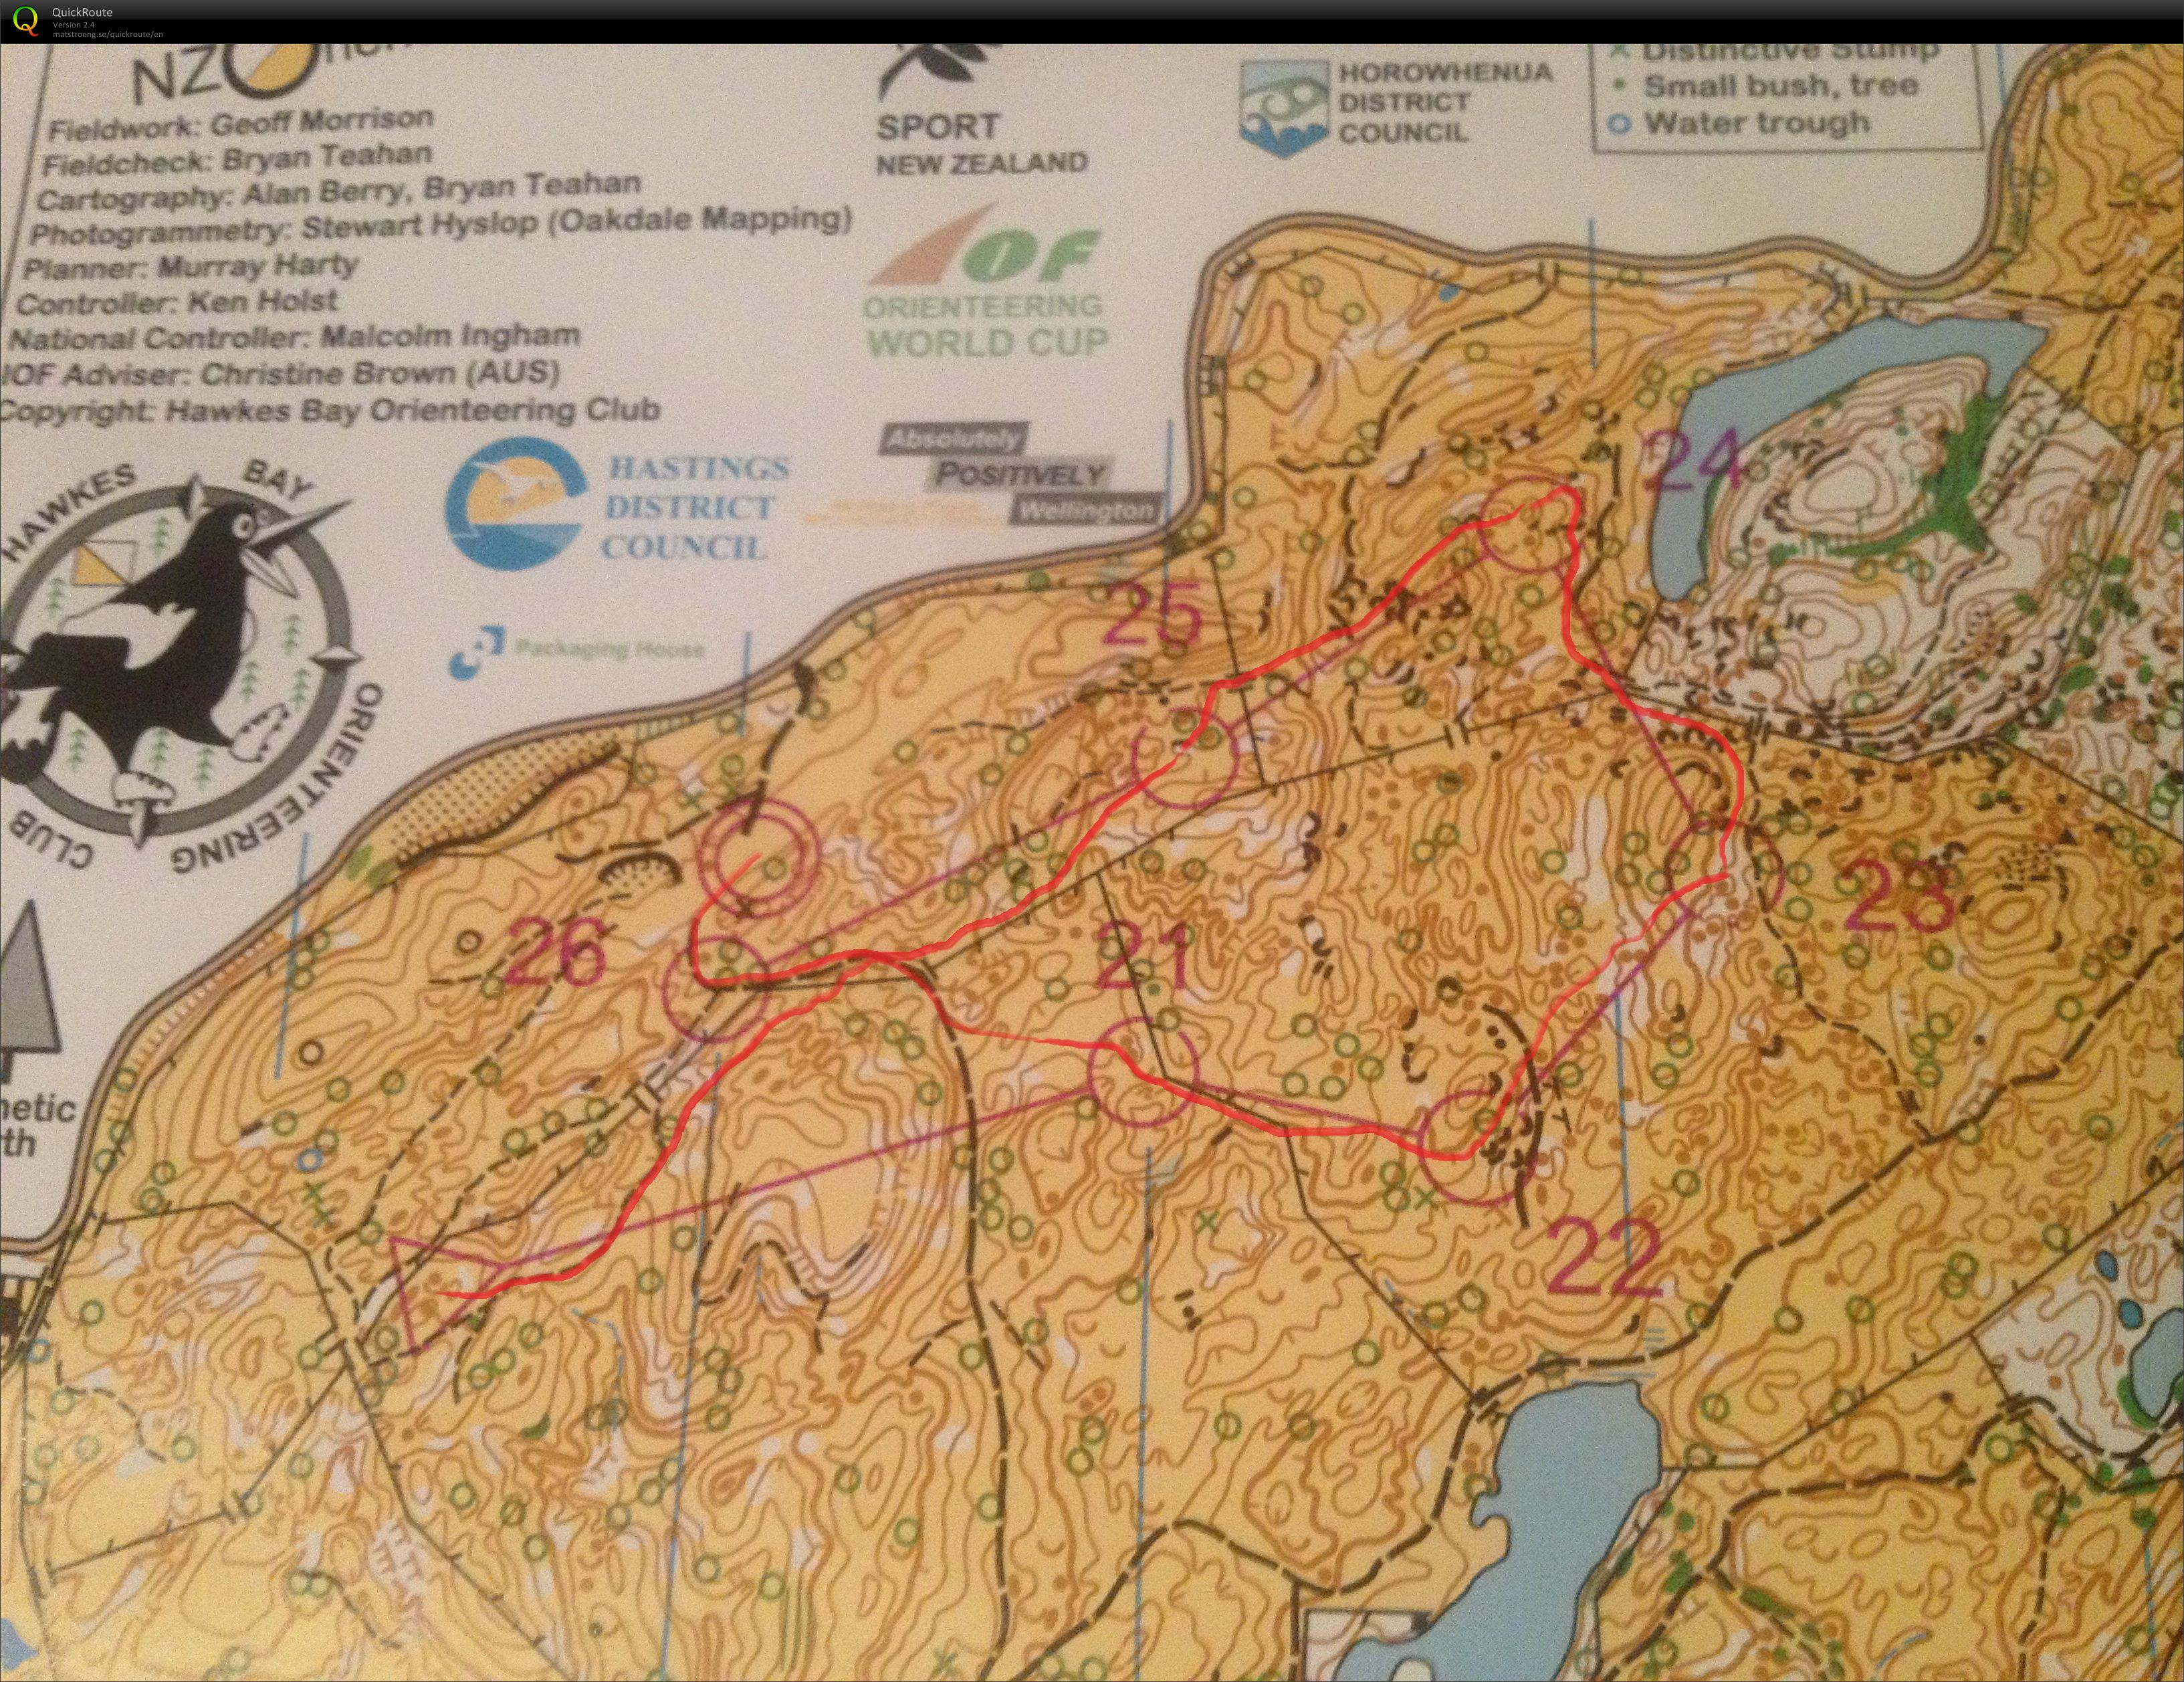 2013 World Cup 3 Chasing Start Map 2 (13/01/2013)